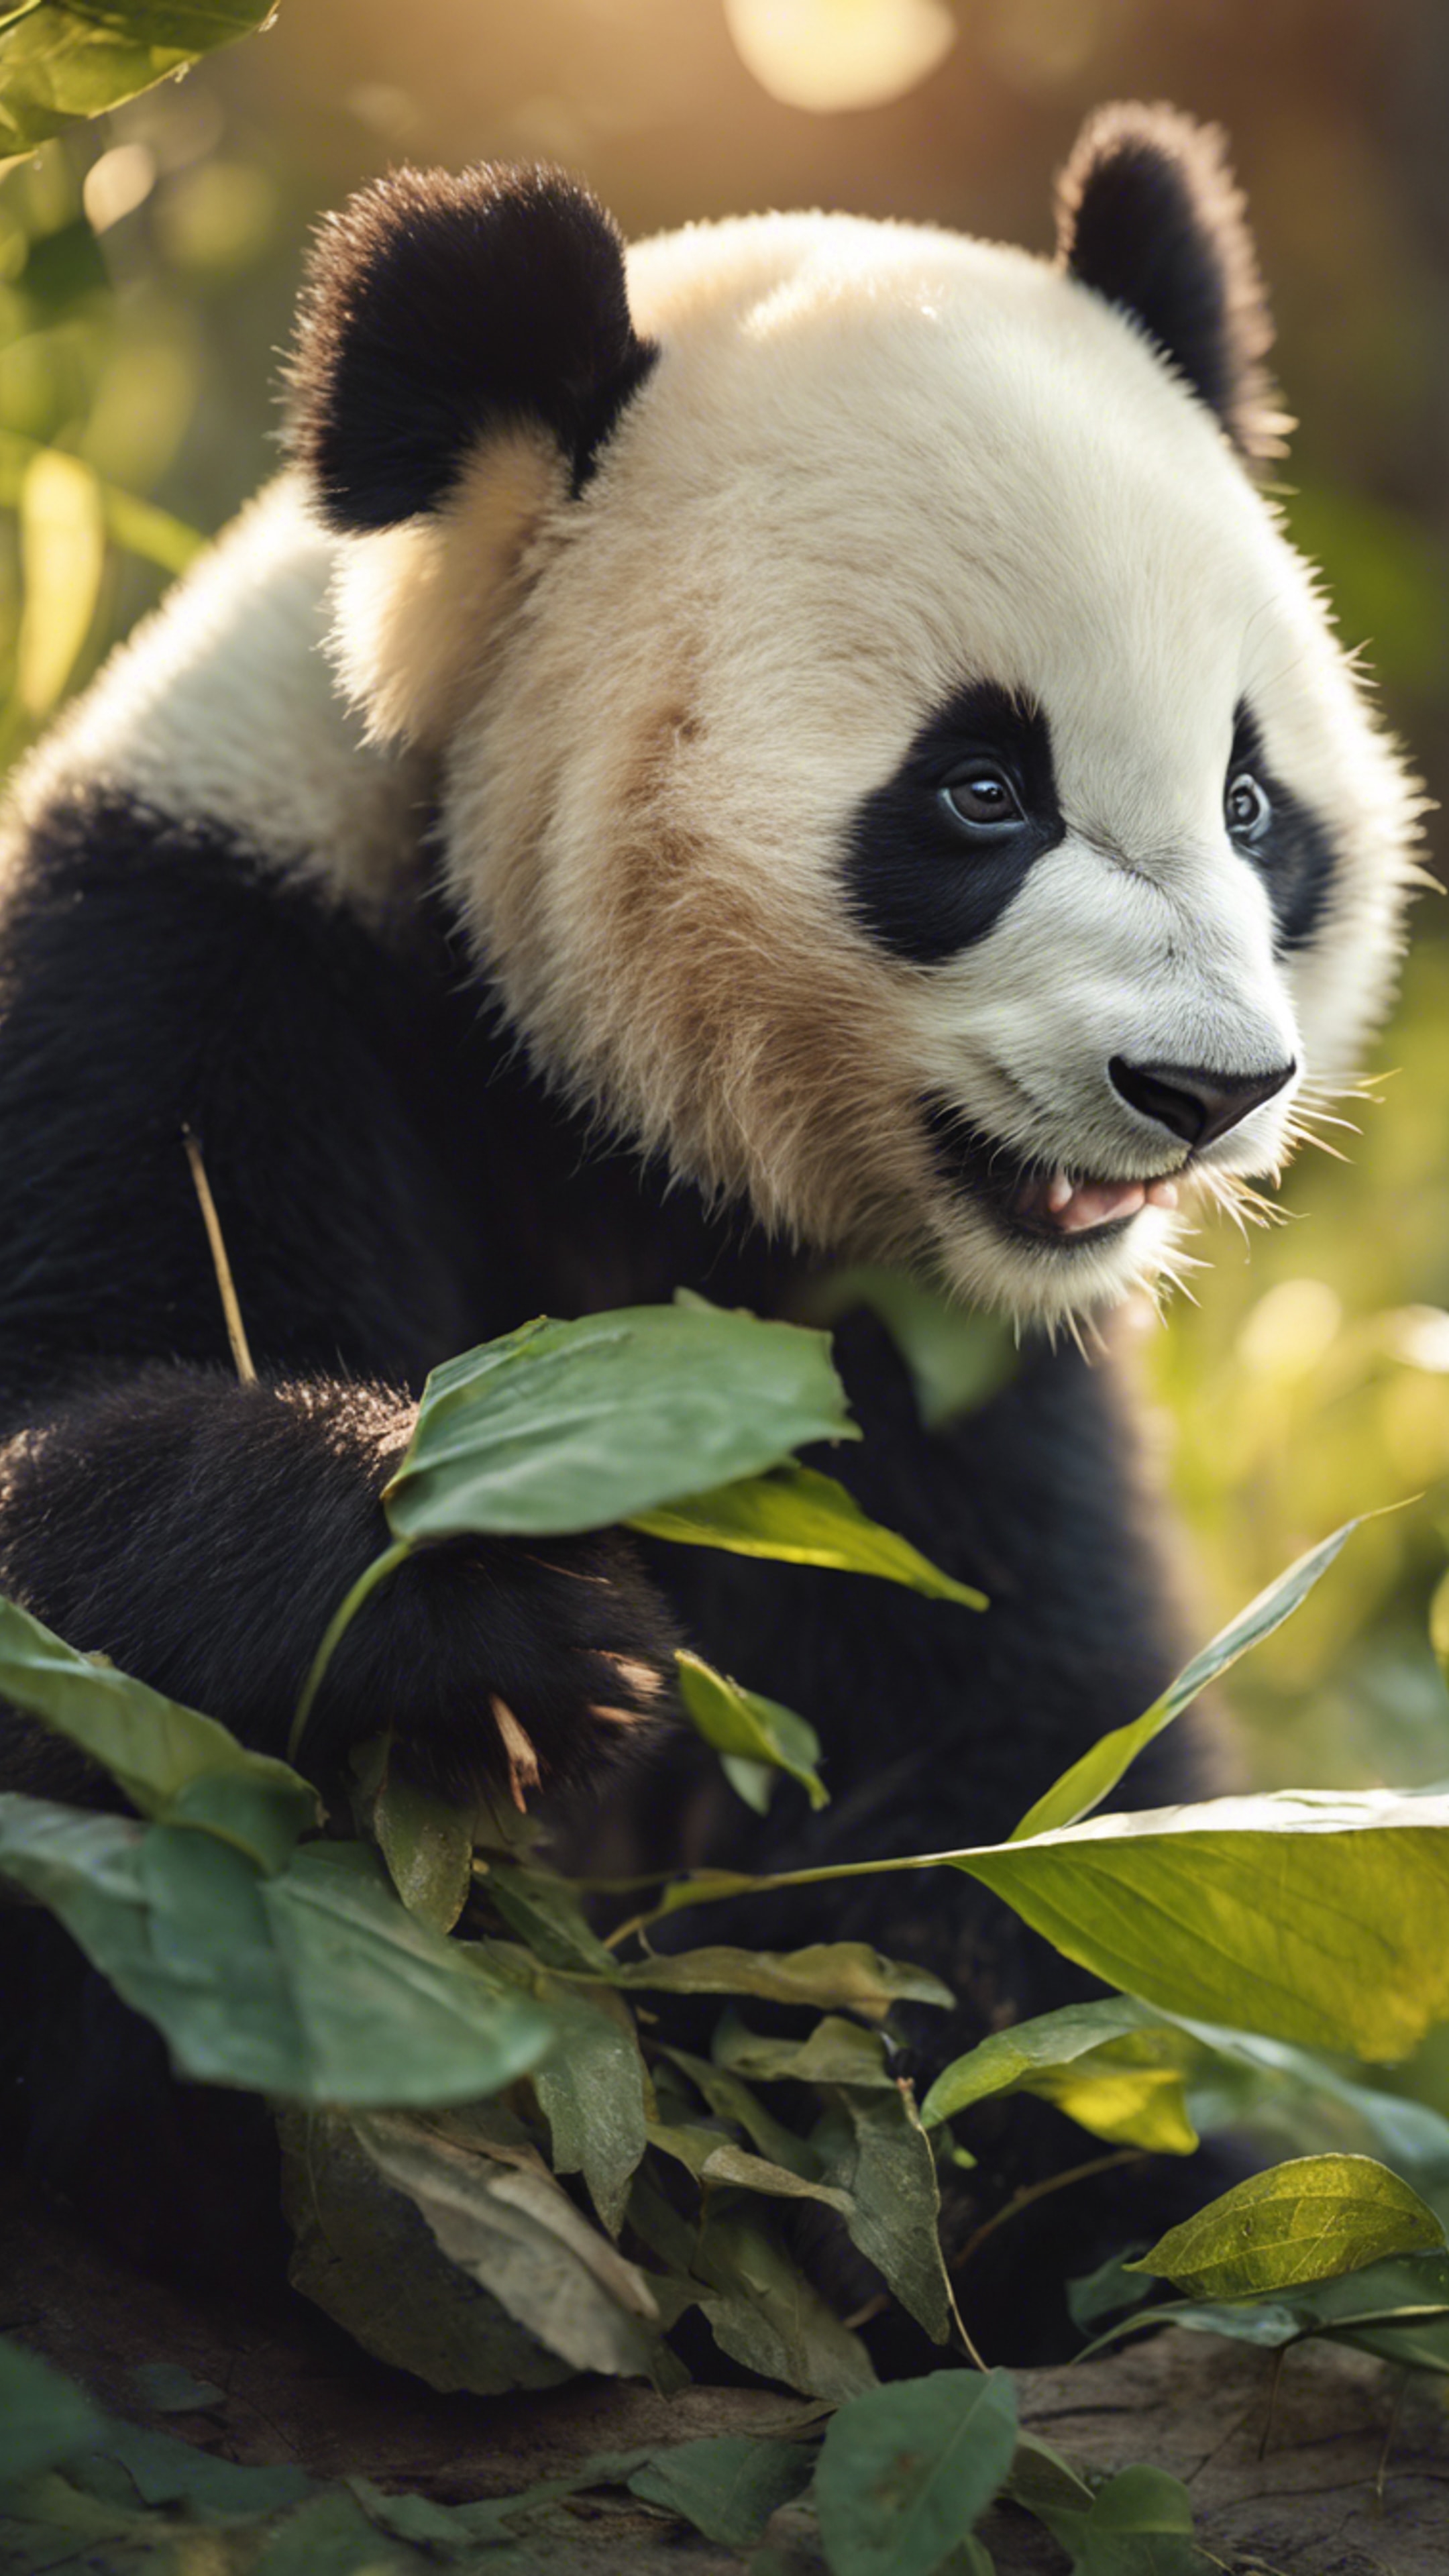 A young panda bear adorably nibbling on a leaf in the soft glow of morning light. Дэлгэцийн зураг[df98dc8ca776441d85bc]